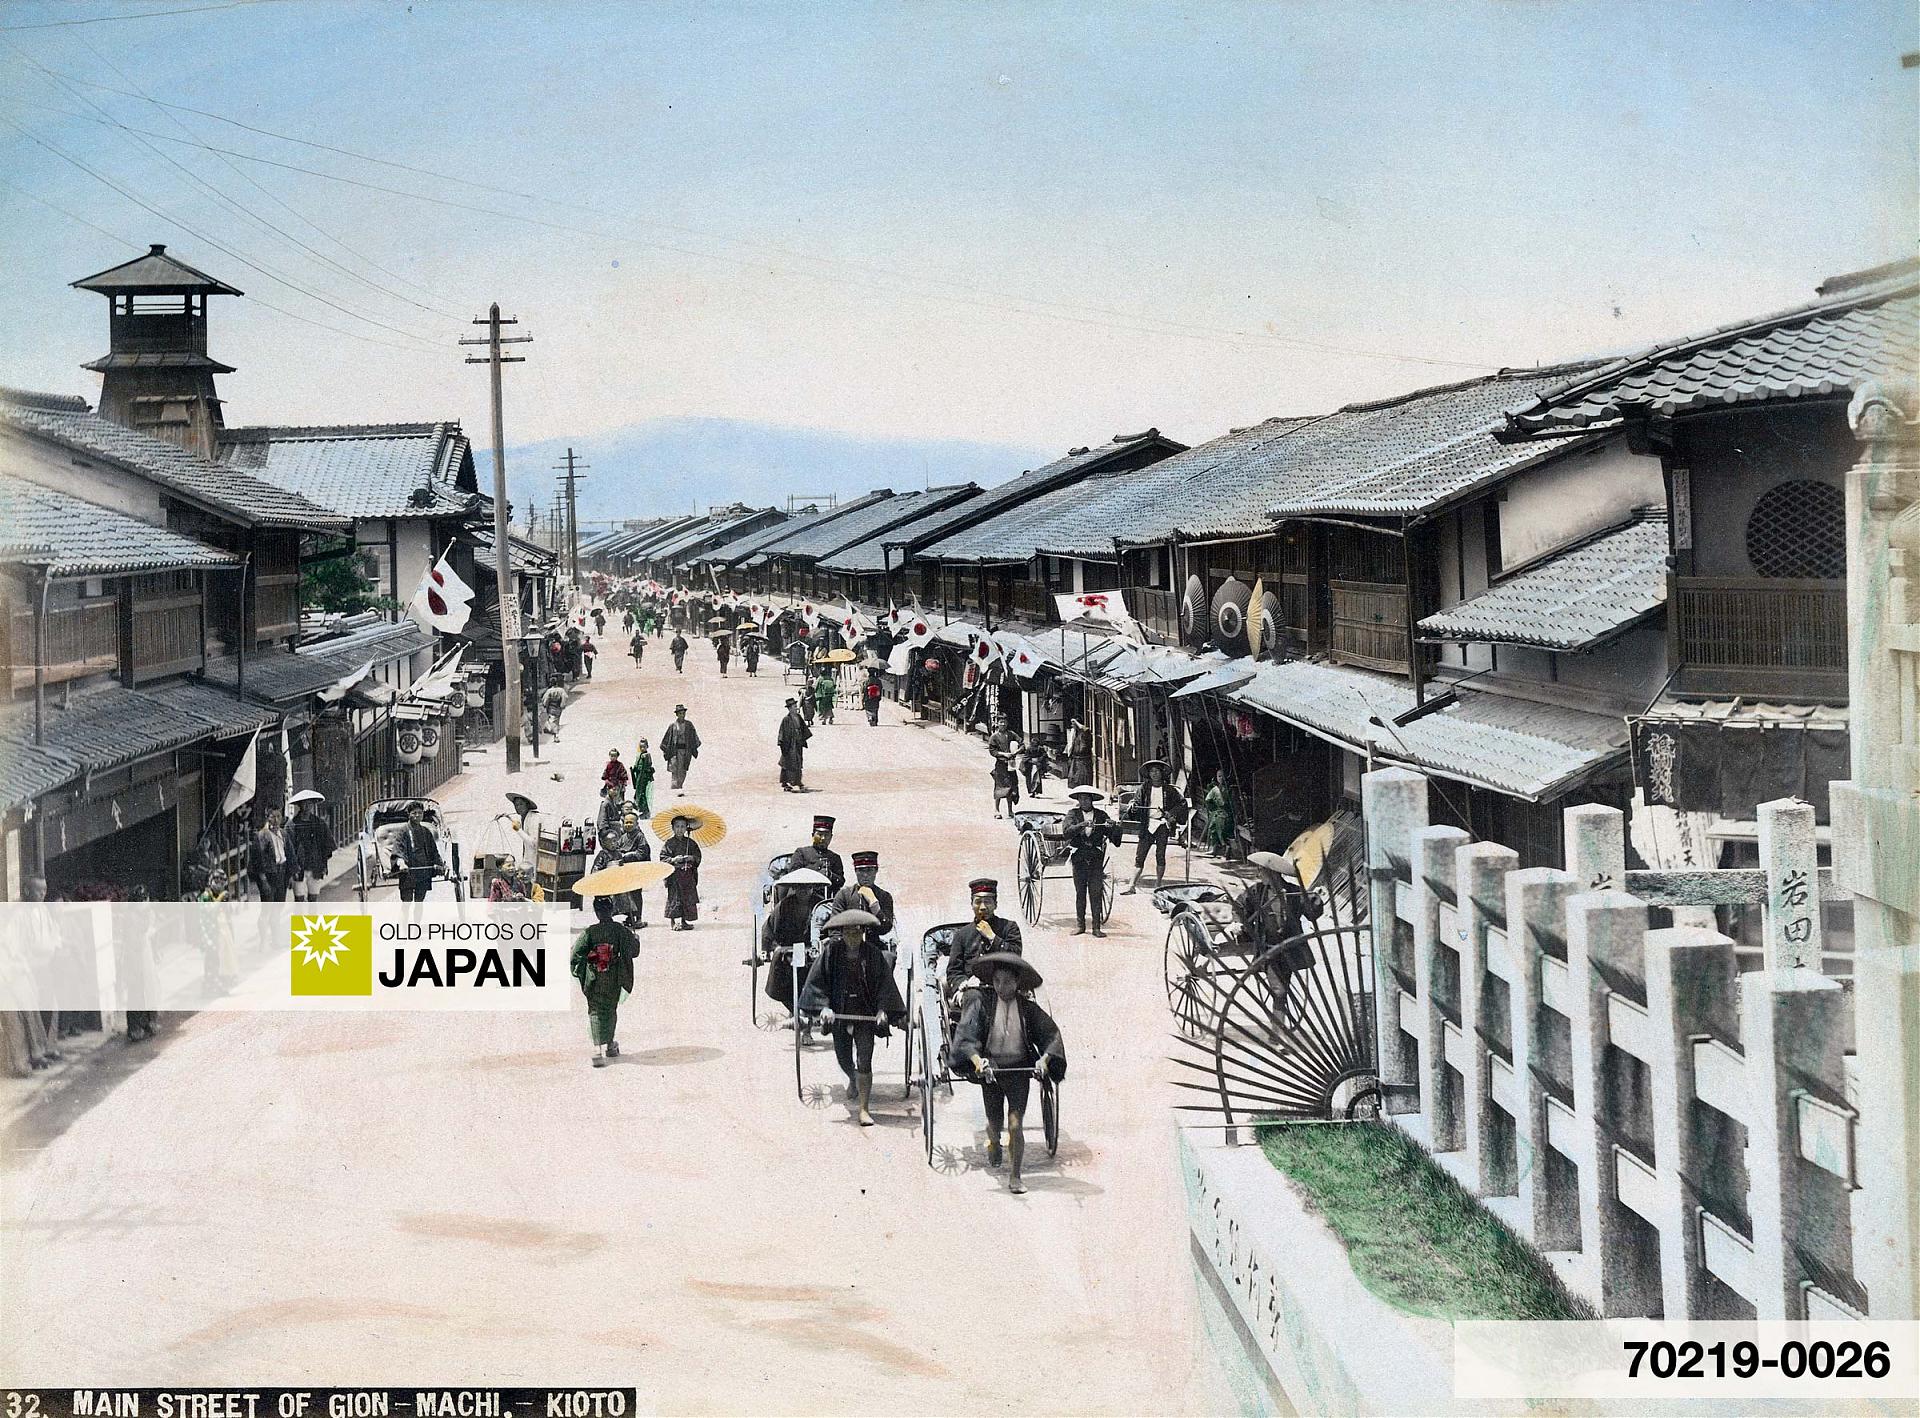 70219-0026 - View on Gion-machi, Kyoto, 1890s